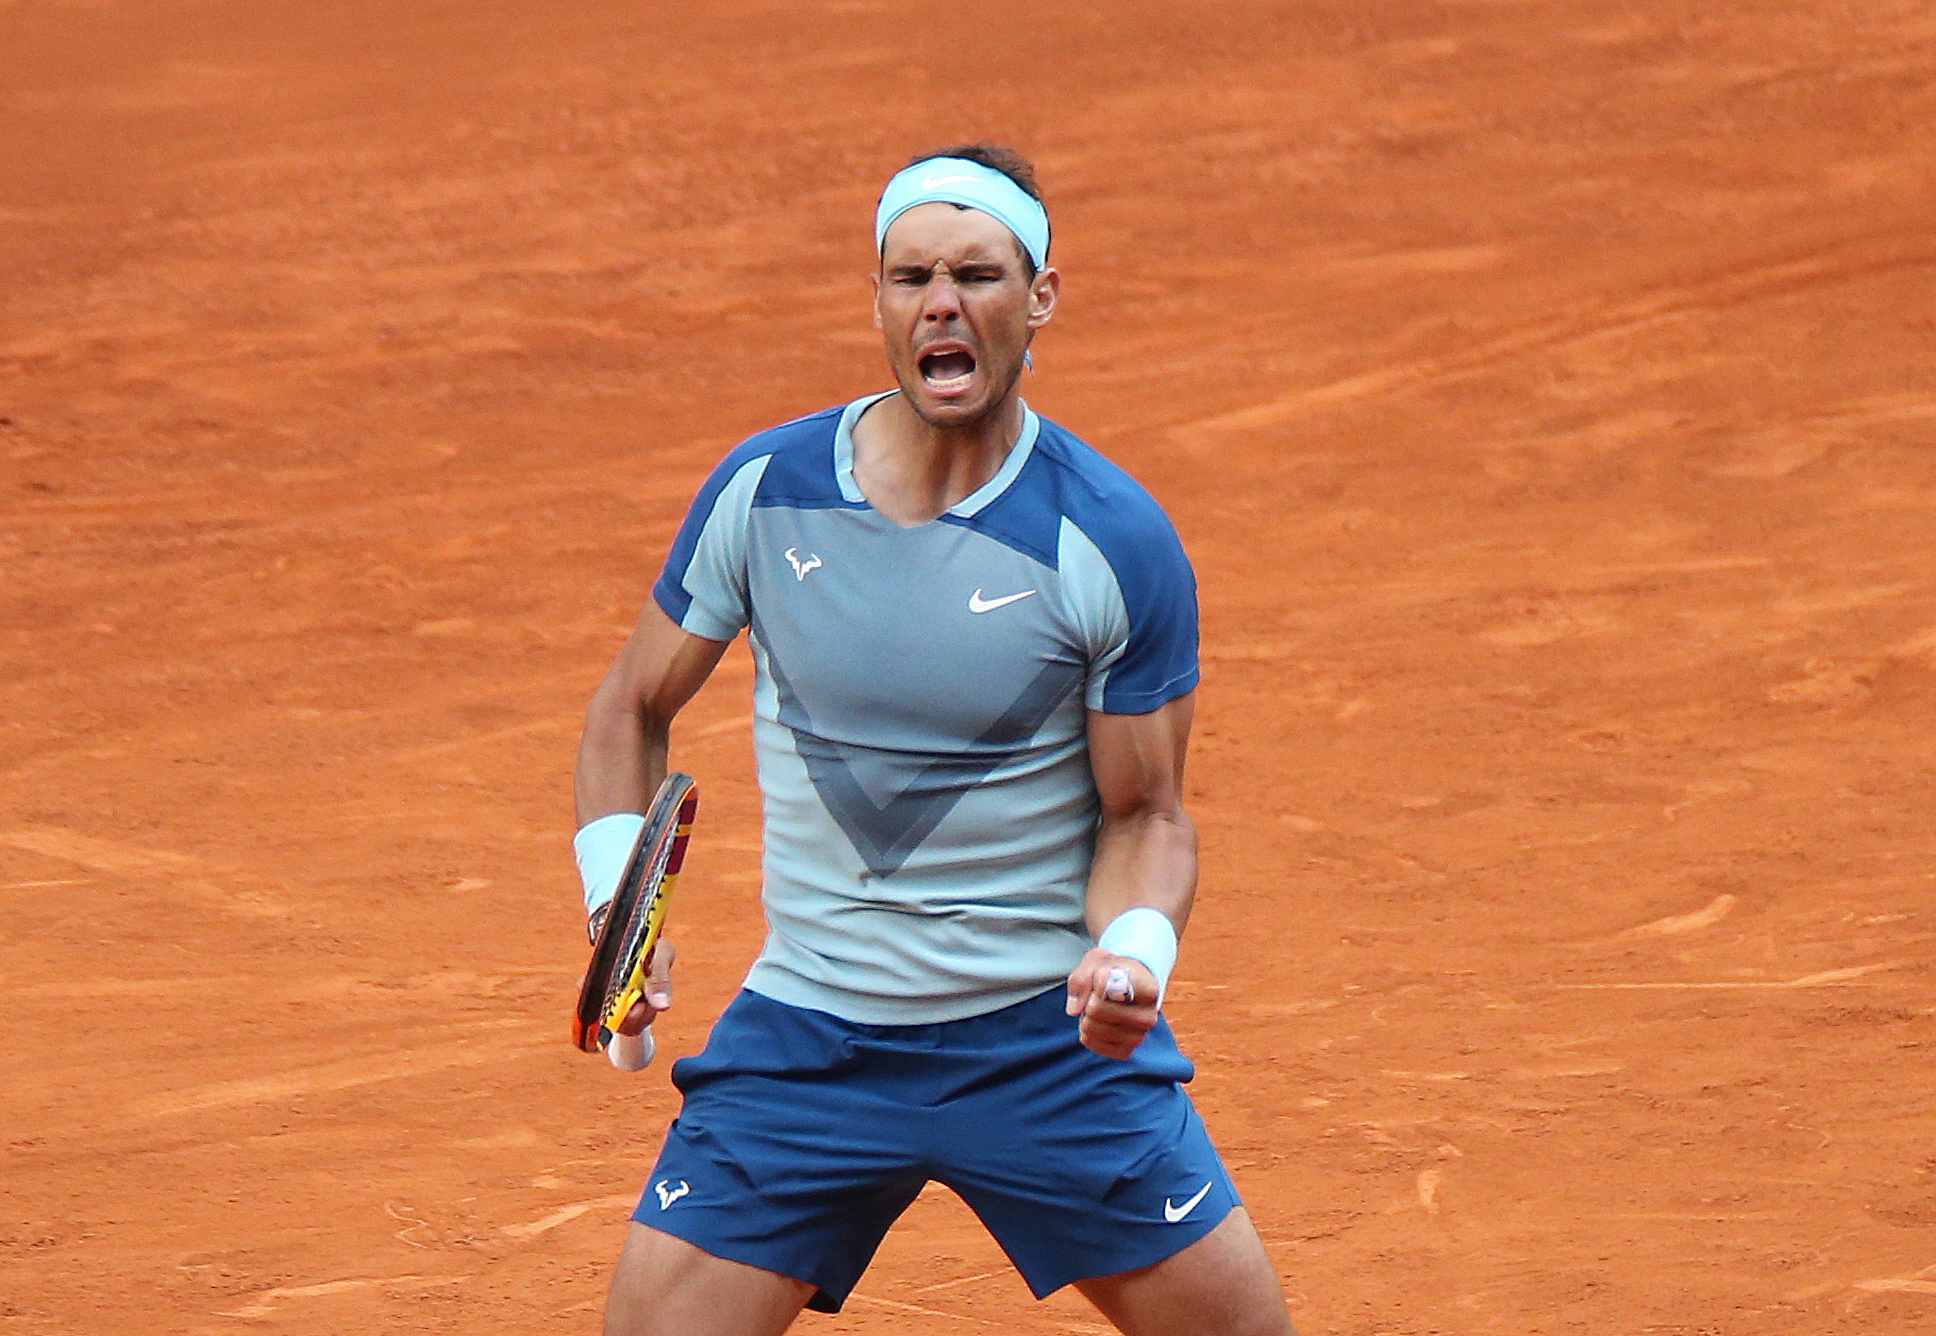 Tennis - ATP Masters 1000 - Madrid Open - Caja Magica, Madrid, Spain - May 5, 2022 Spain's Rafael Nadal reacts during his third round match against Belgium's David Goffin